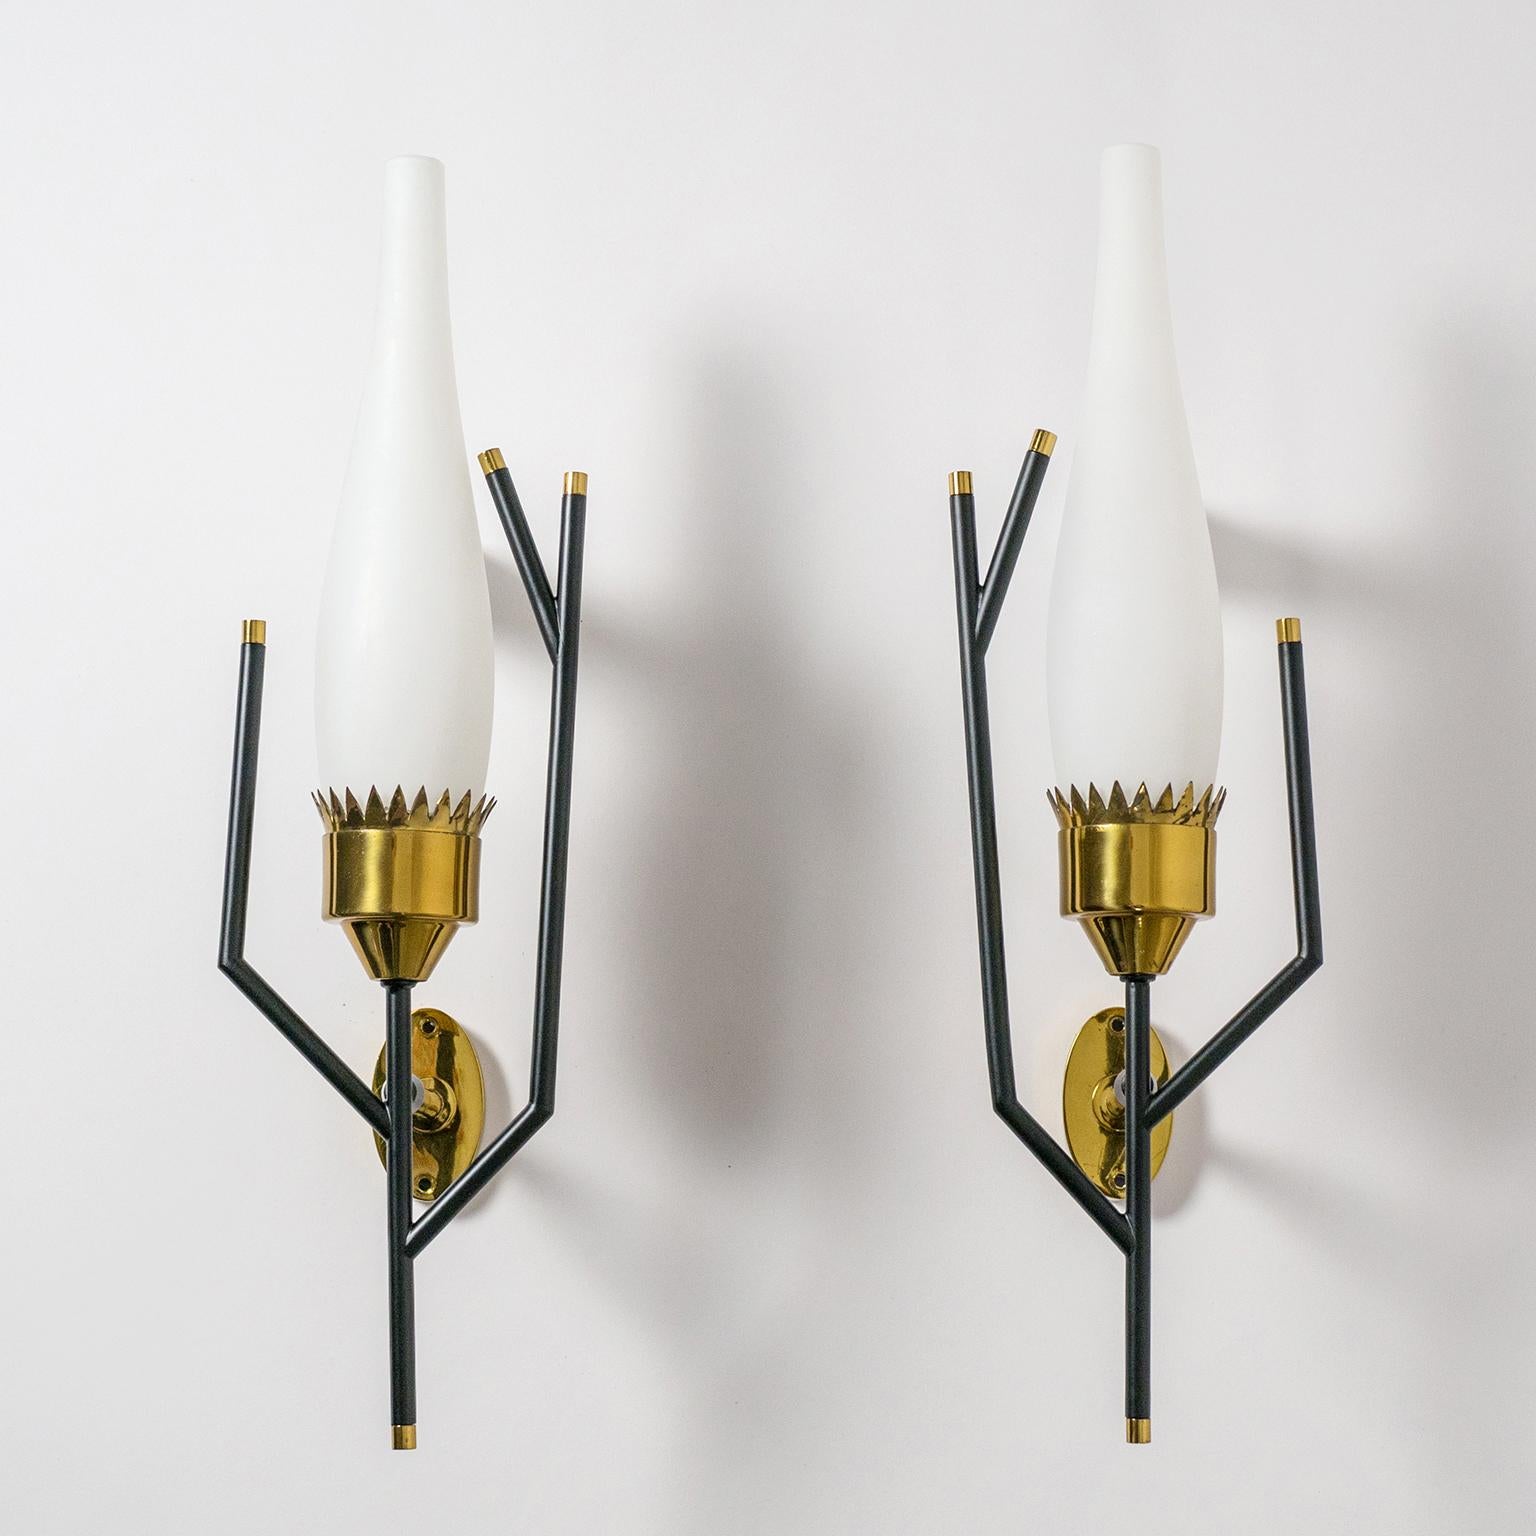 Exceptional pair of 1950s Italian brass and satinated glass sconces. Beautifully crafted these feature satin glass diffusers which sit in a crown shaped brass cup surrounded by modernist 